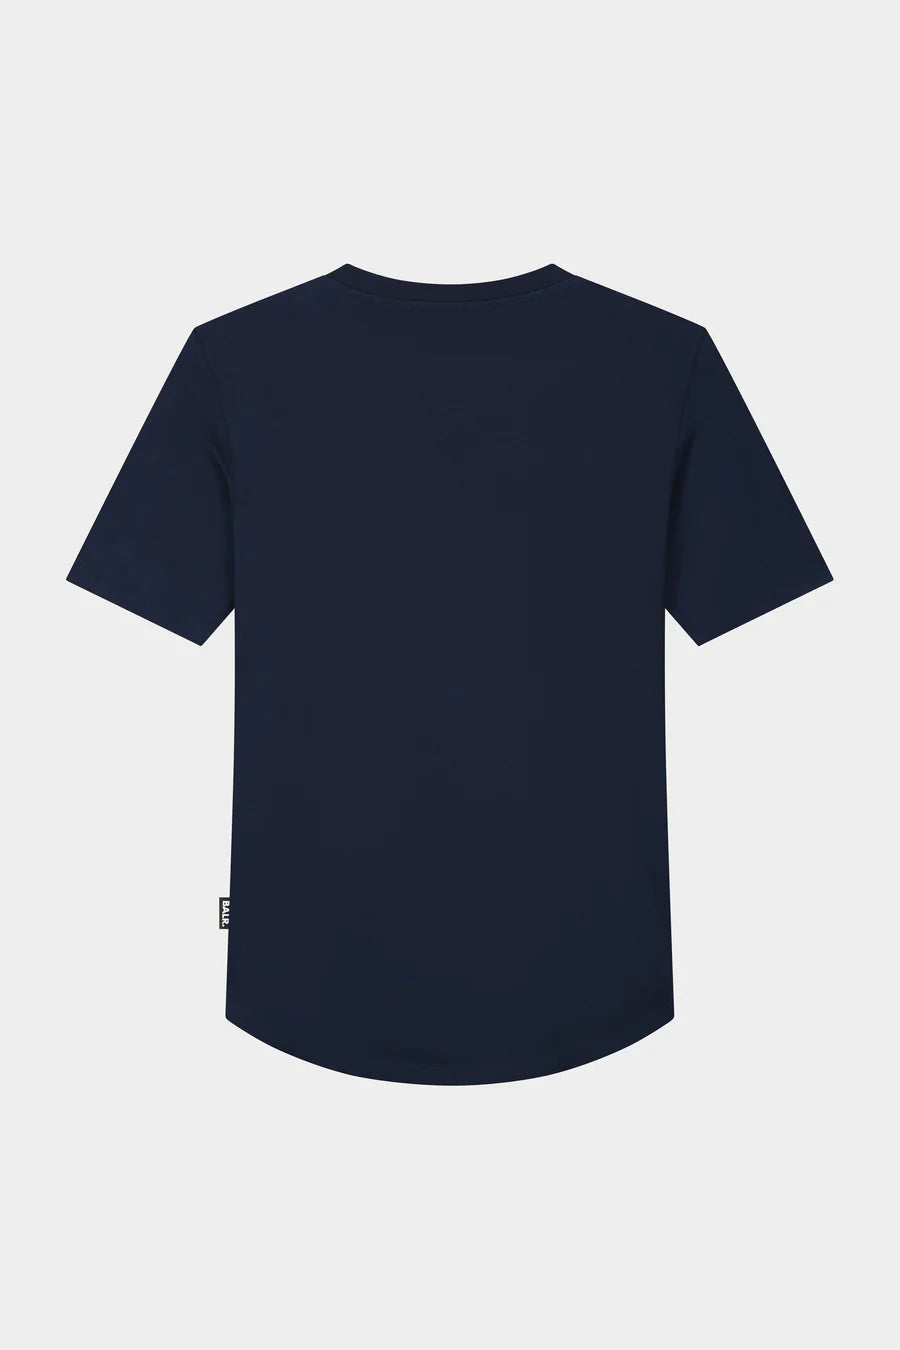 ATHLETIC SMALL BRANDED CHEST T SHIRT NAVY BLUE